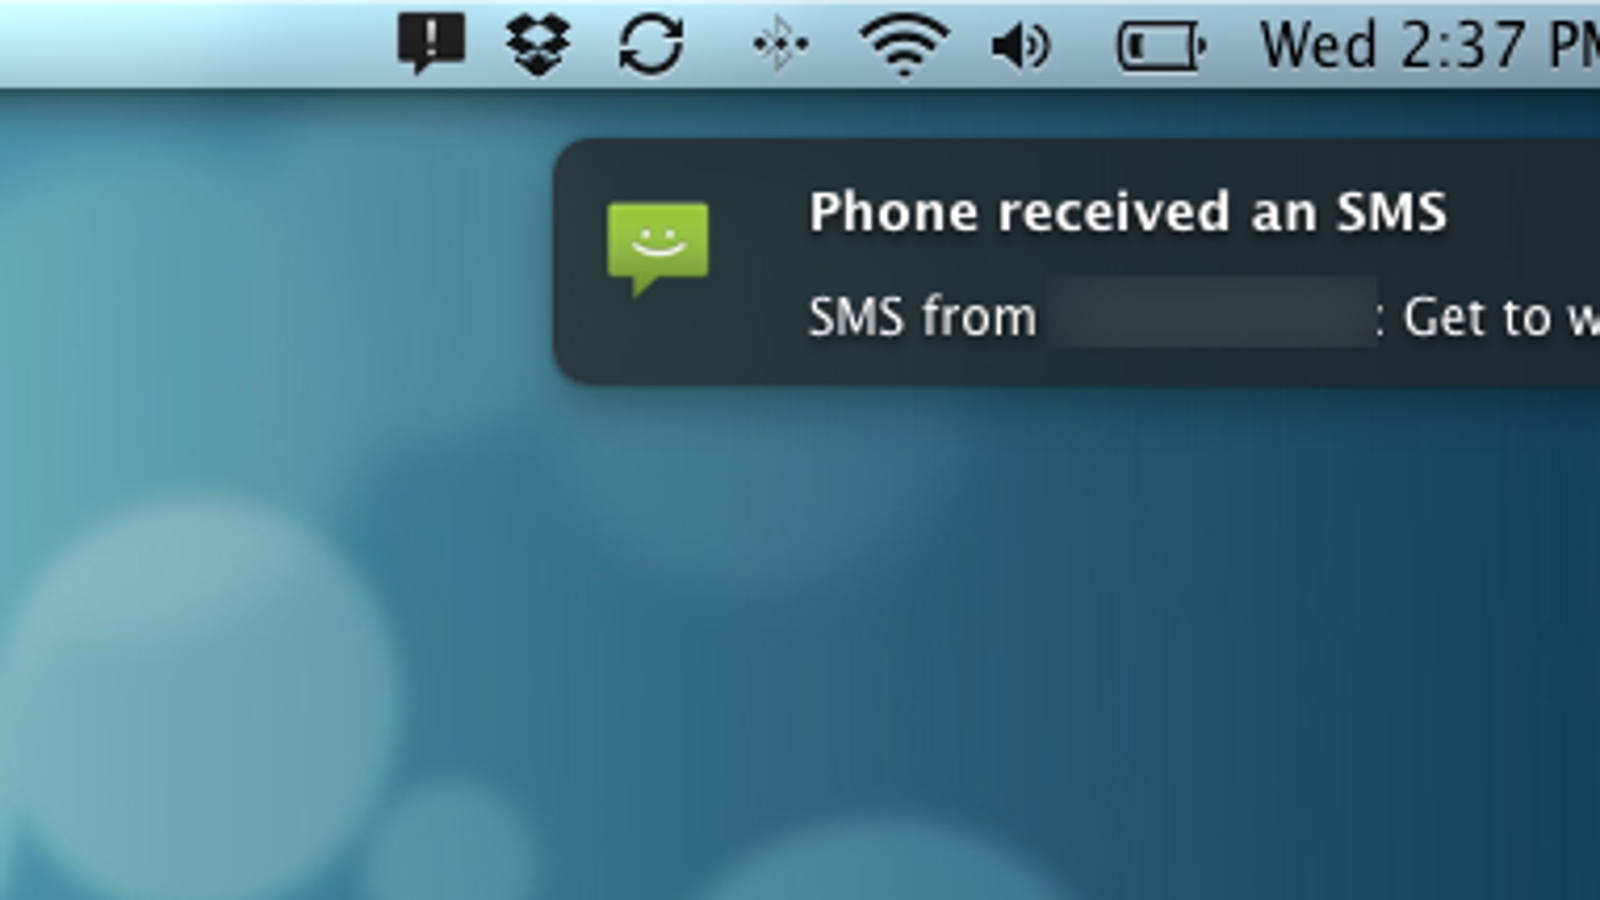 send sms from mac 10.13